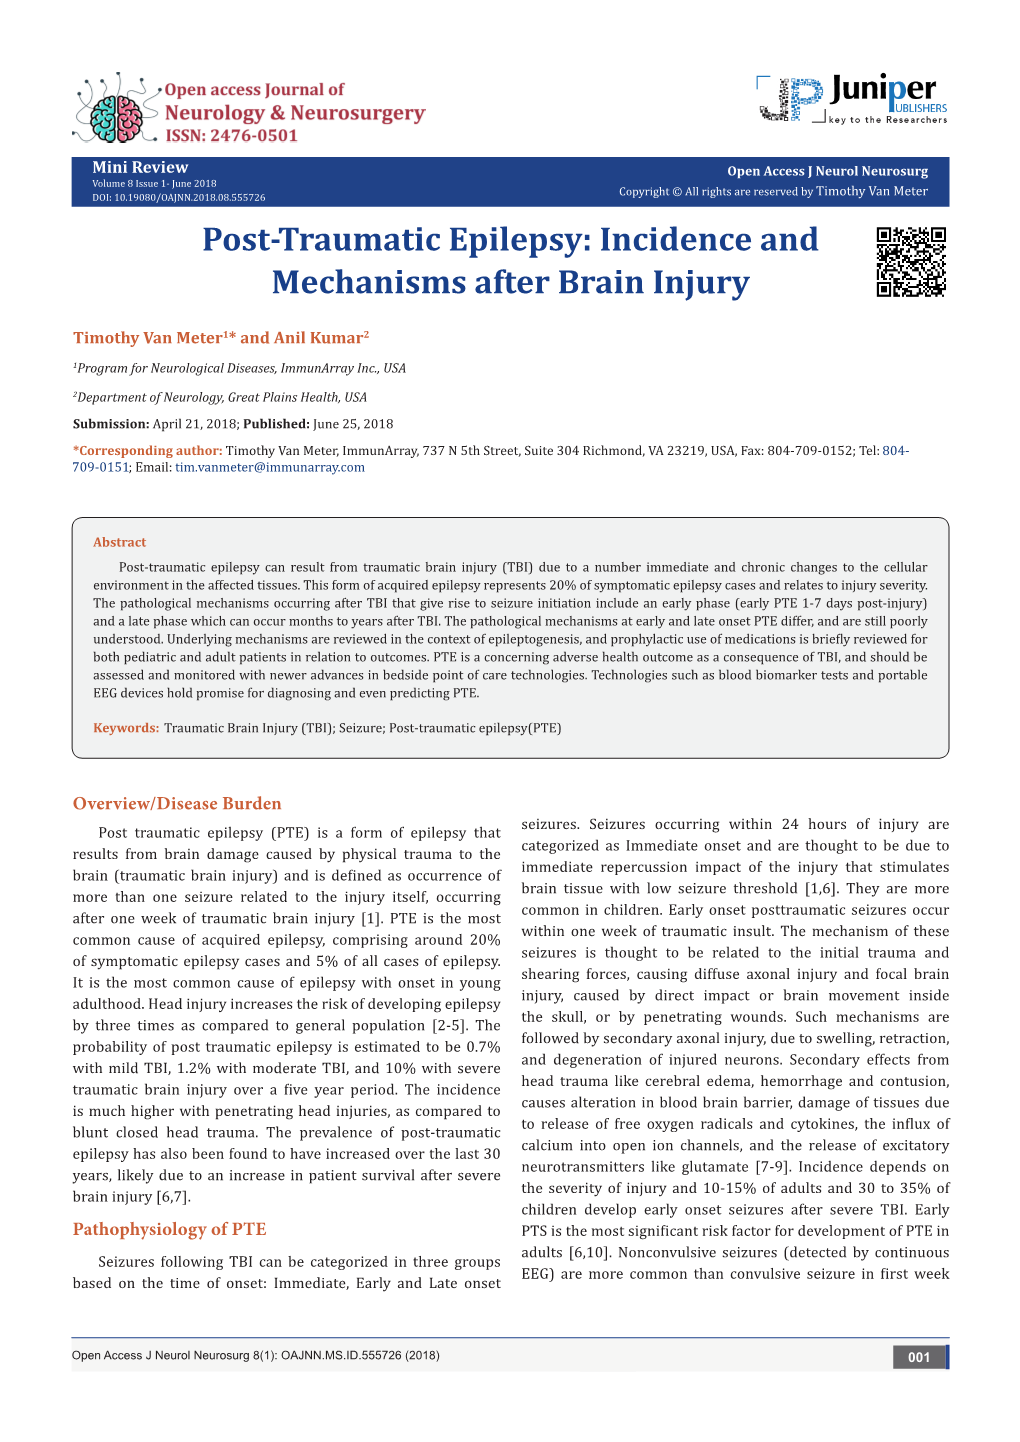 Post-Traumatic Epilepsy: Incidence and Mechanisms After Brain Injury